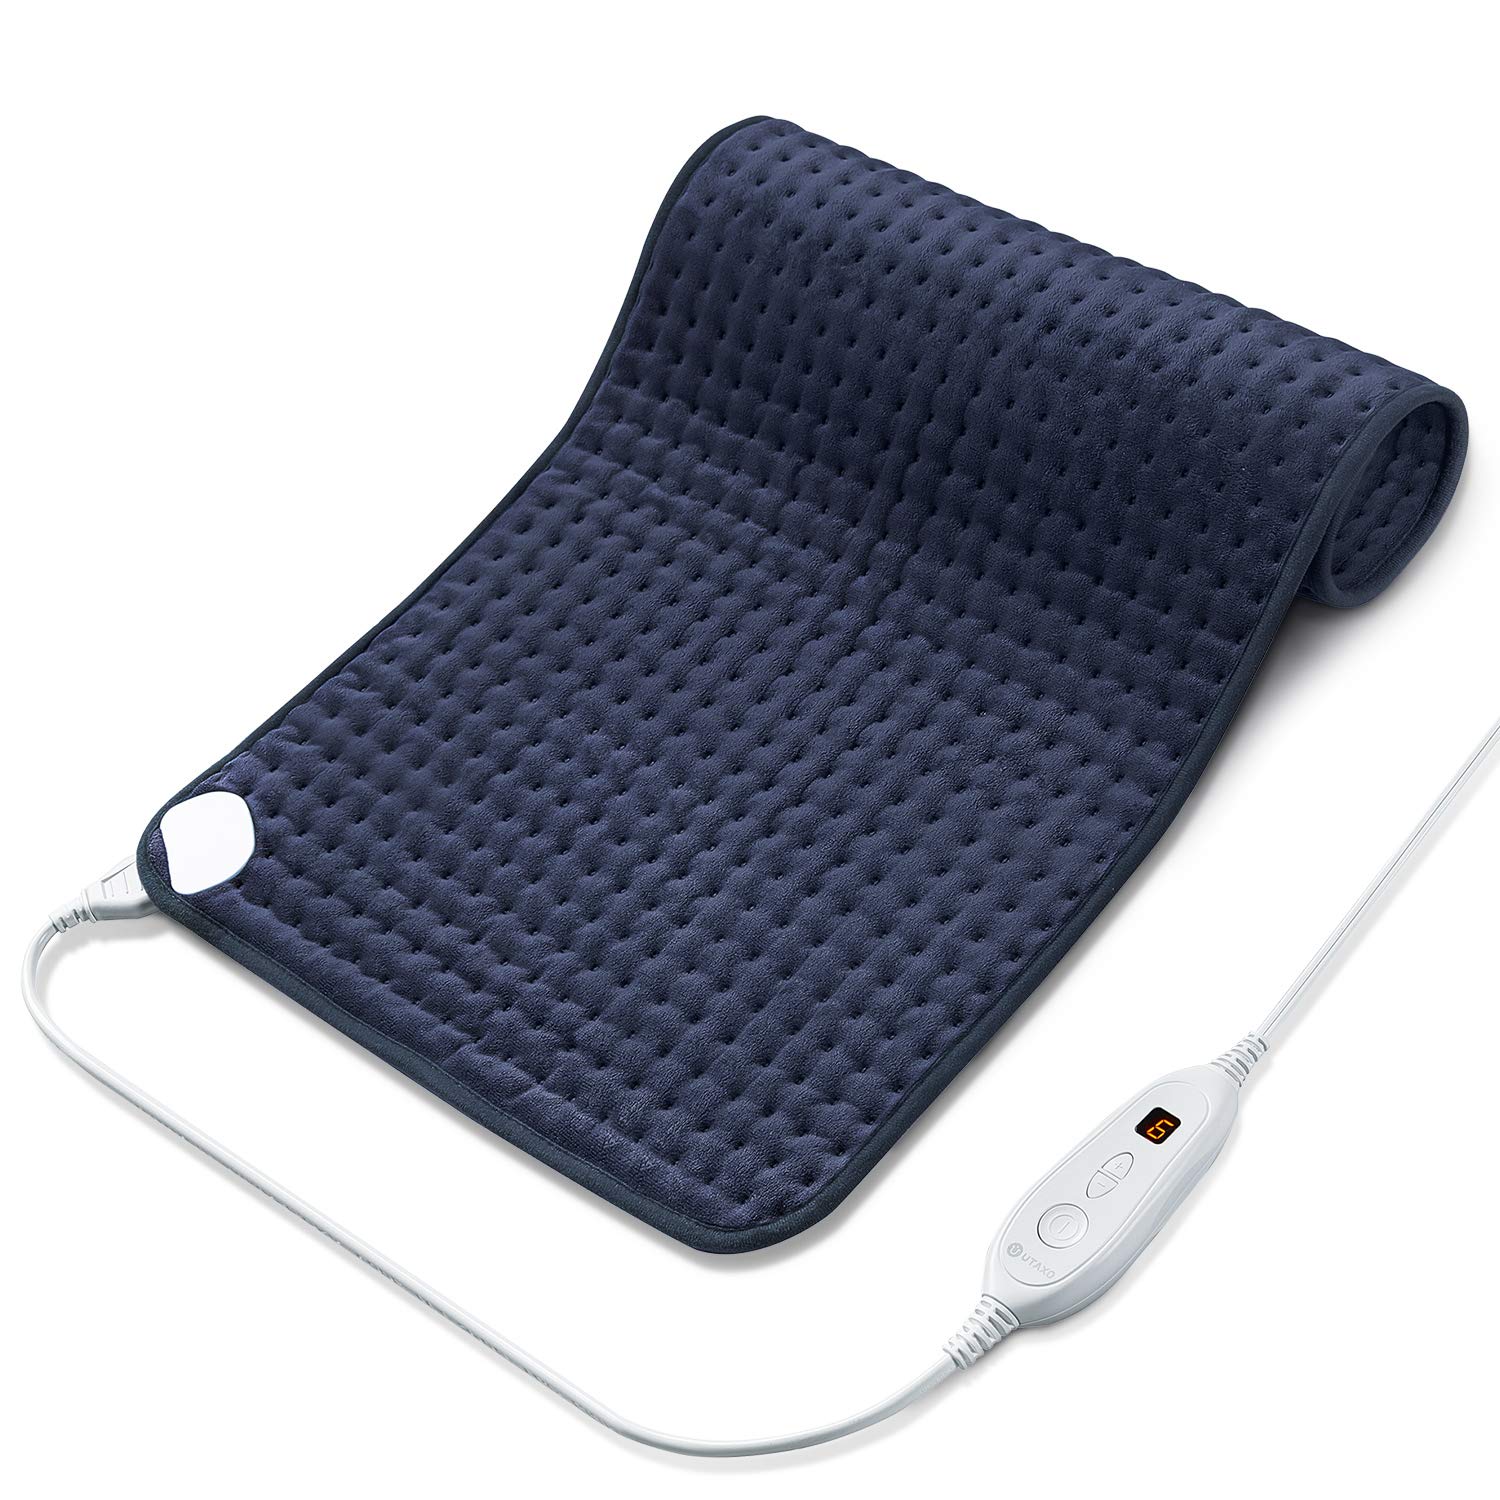 Utaxo Heating Pad for Pain Relief, 33×17-Inch